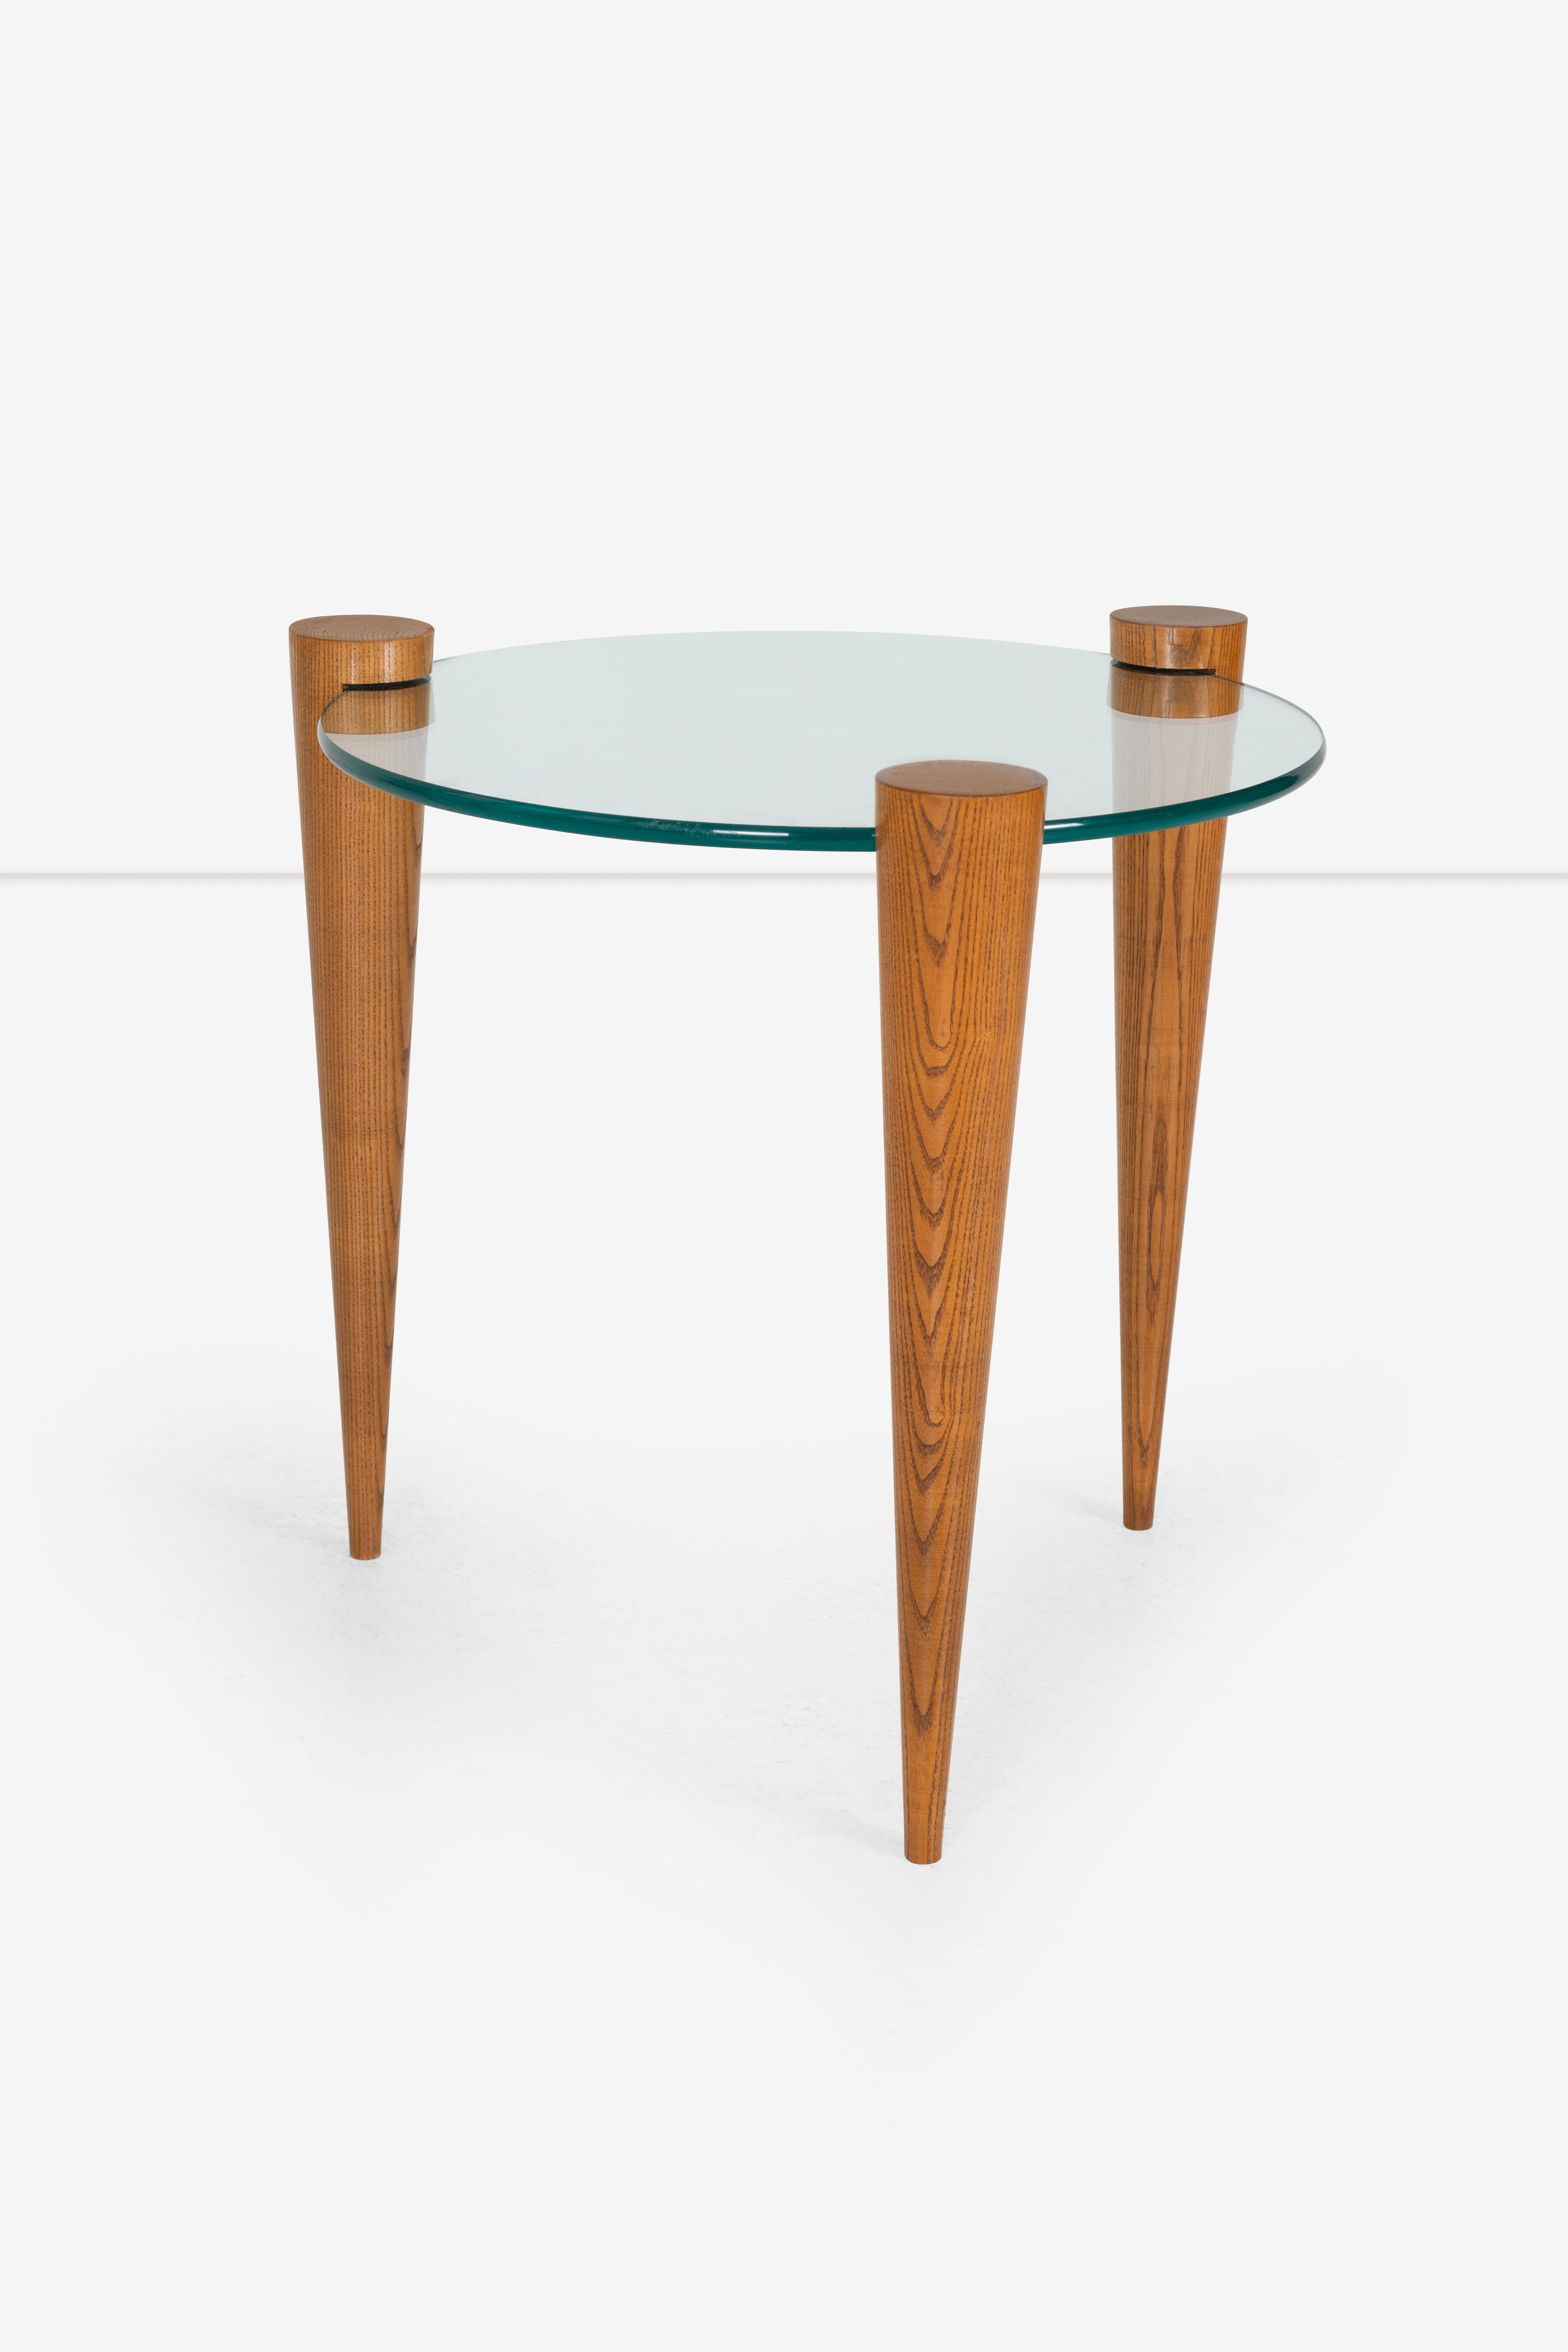 American Pair of Mid-Century Modern Side Tables. For Sale